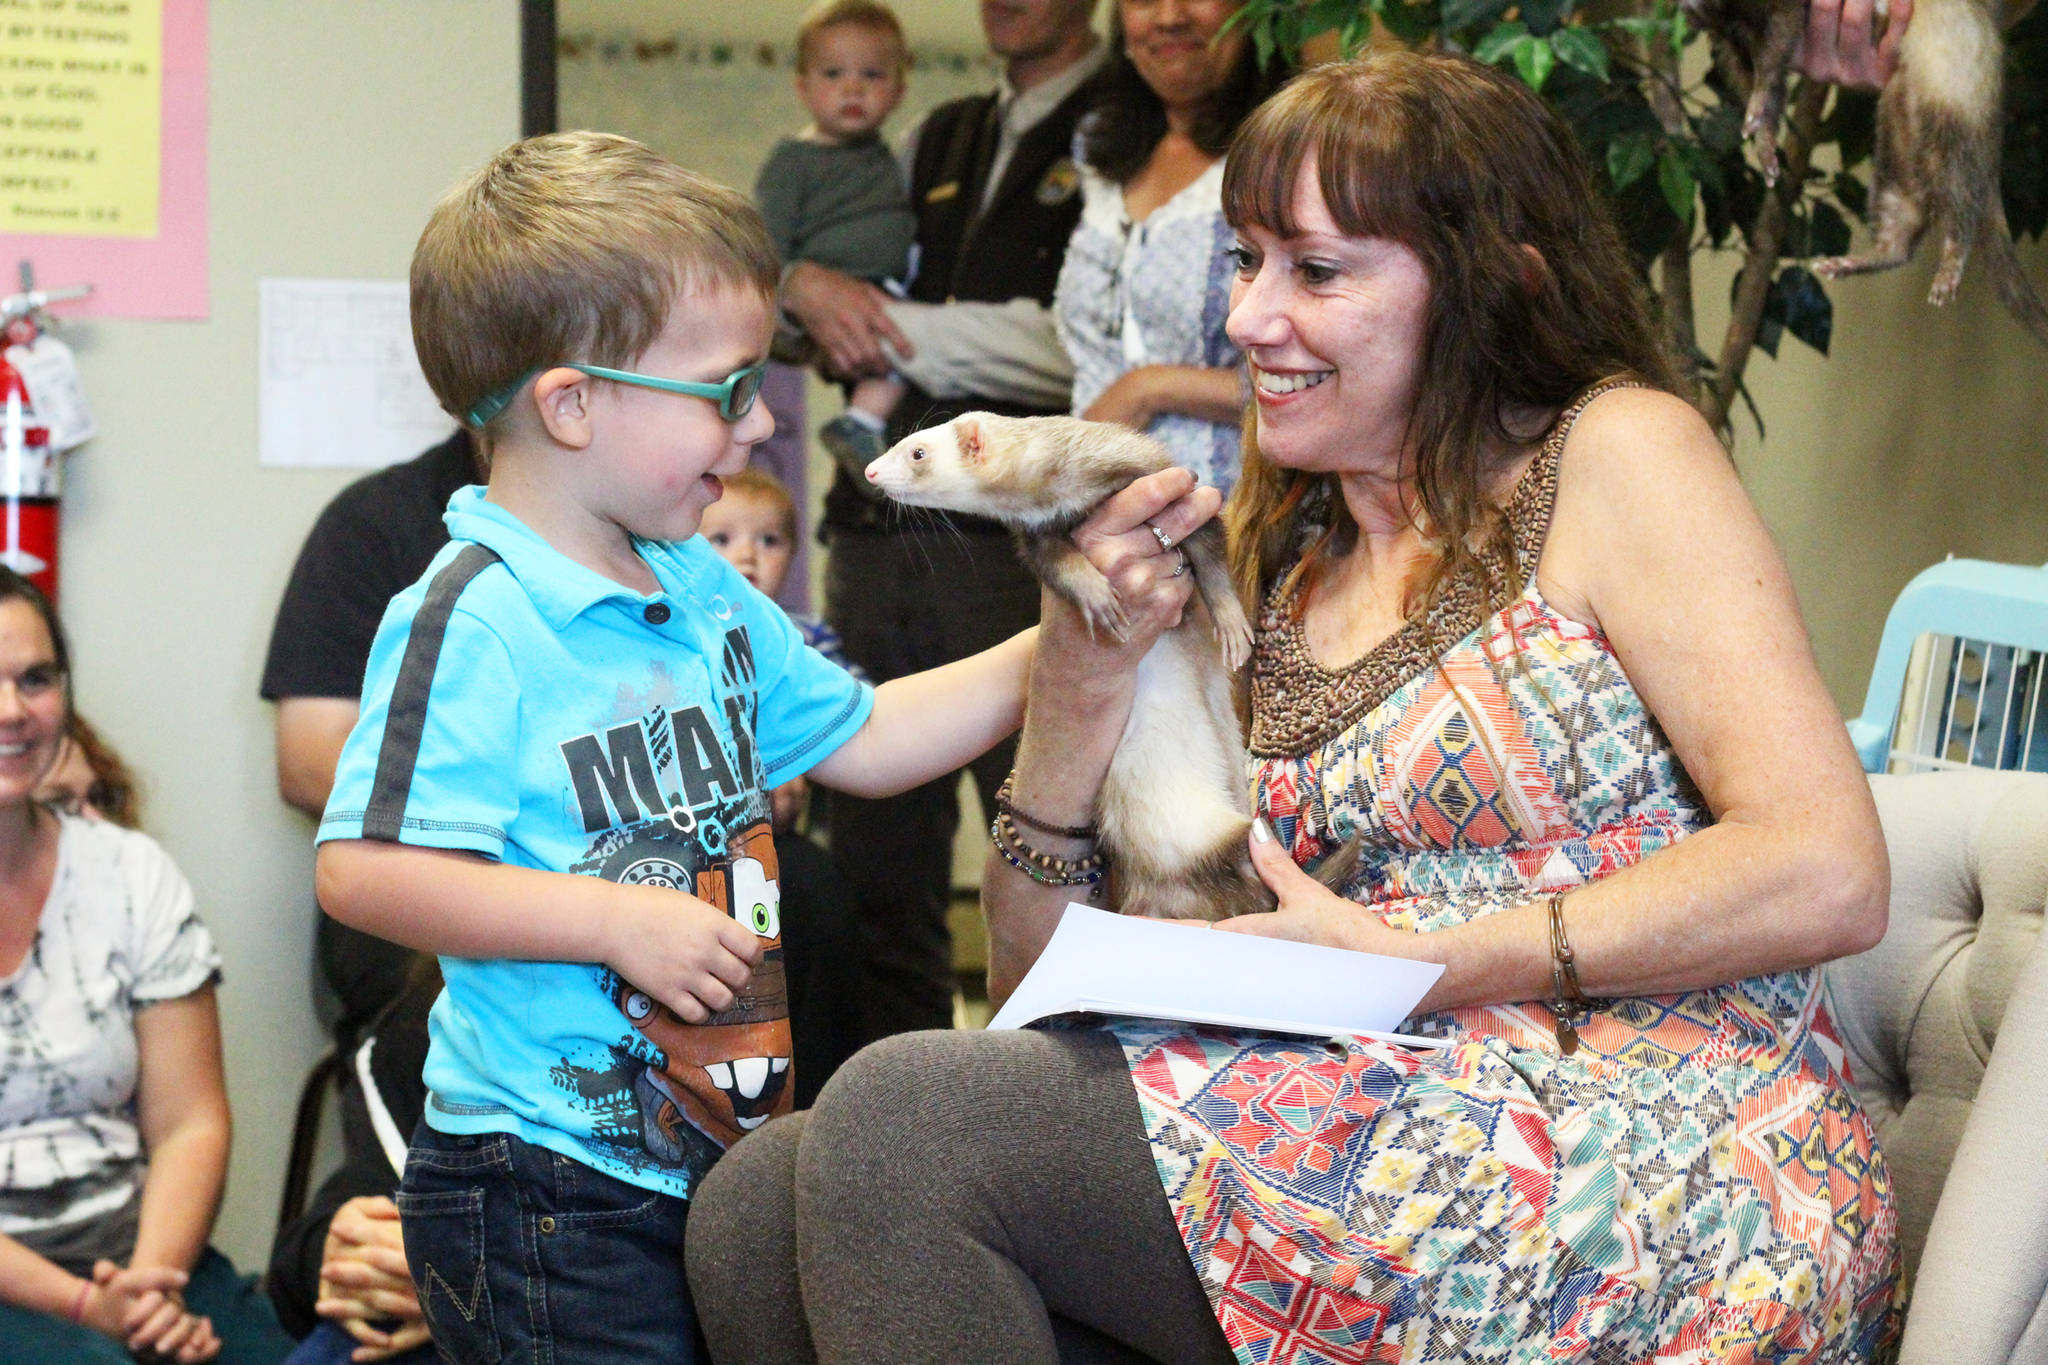 Photo by Megan Pacer/Homer News Homer resident Jeannette Aragones introduces her ferret, Oscar, to Jack Roderick during a special reading of her book, “I Am Oscar. I Am in Charge.” on Friday, July 21, 2017 at the Girassol Learning Center in Homer, Alaska.